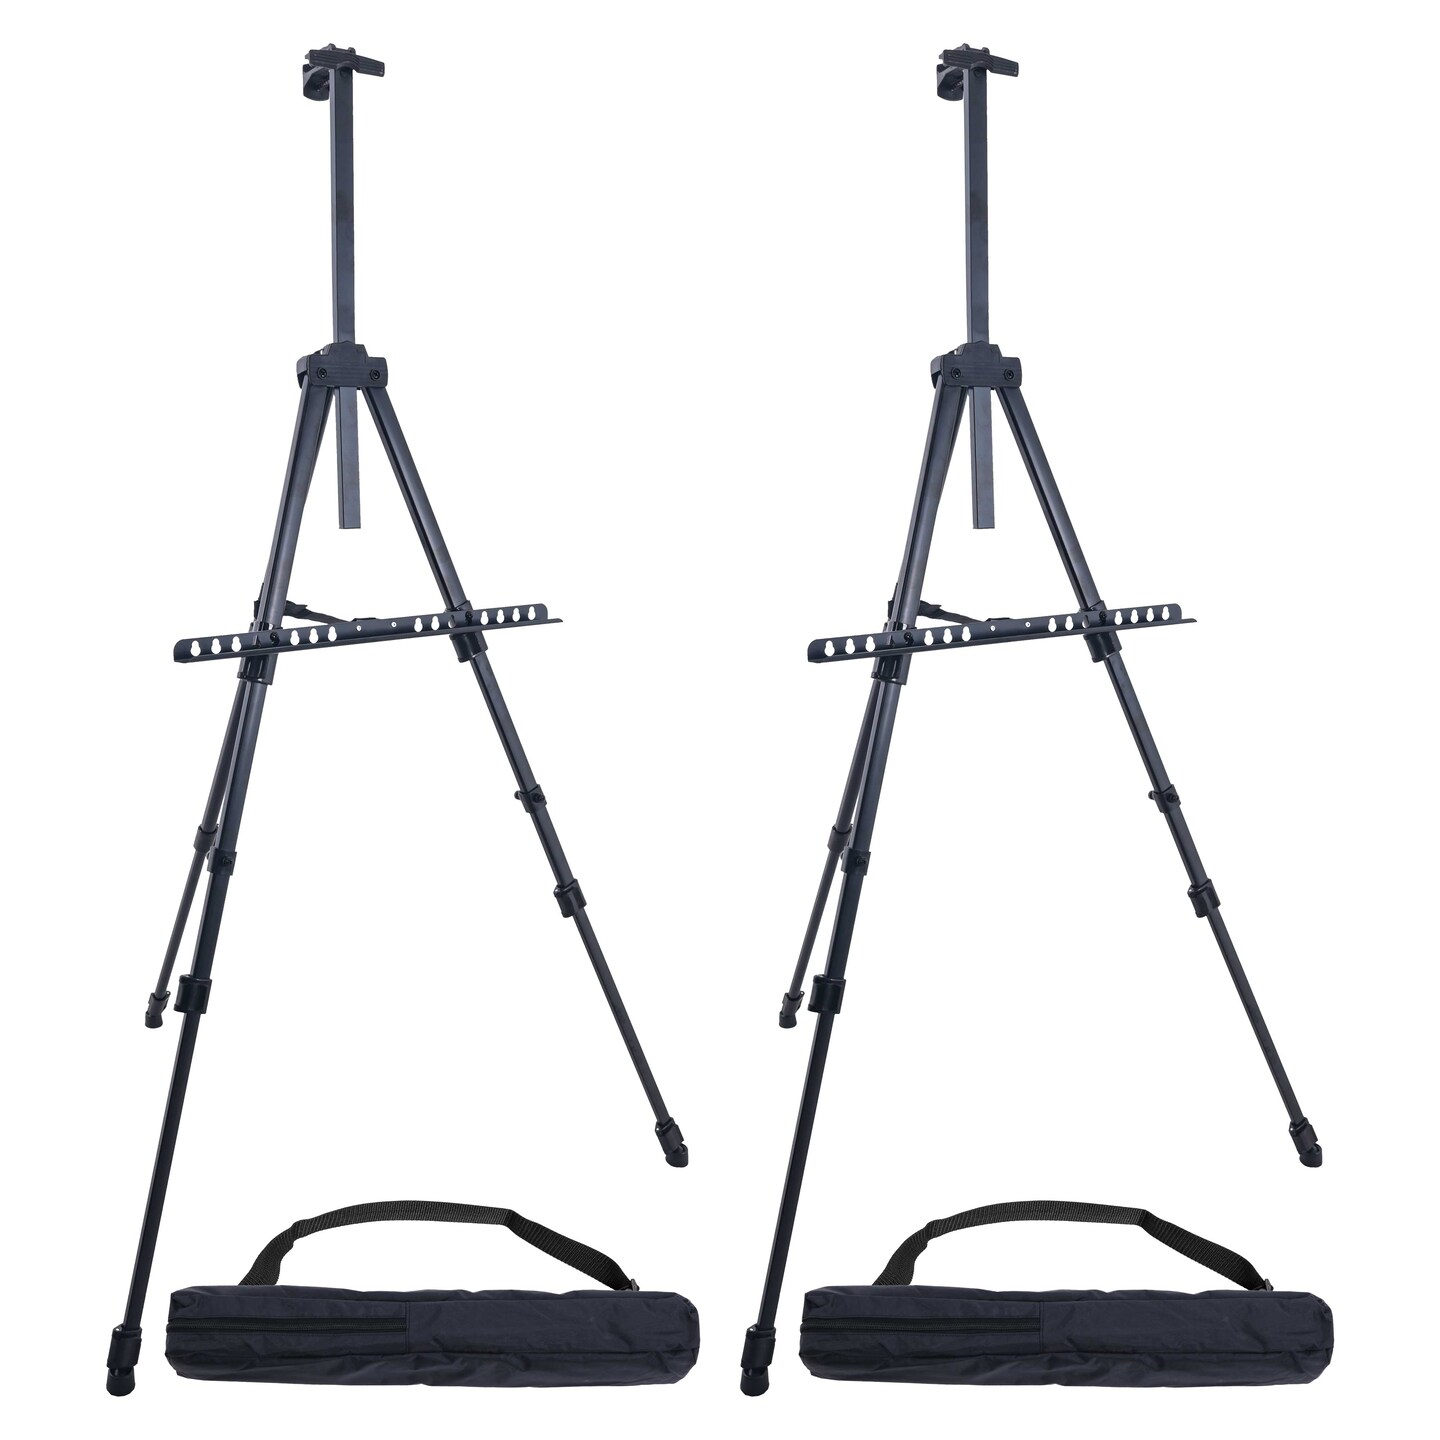  HERCHR Easel Stand for Painting, Easels for Painting Canvas  Easel Stand for Display Backdrop Stand for Parties Easley Stand for Painting  Portable Artist Easel Stand Folding Tripod Black : Office Products